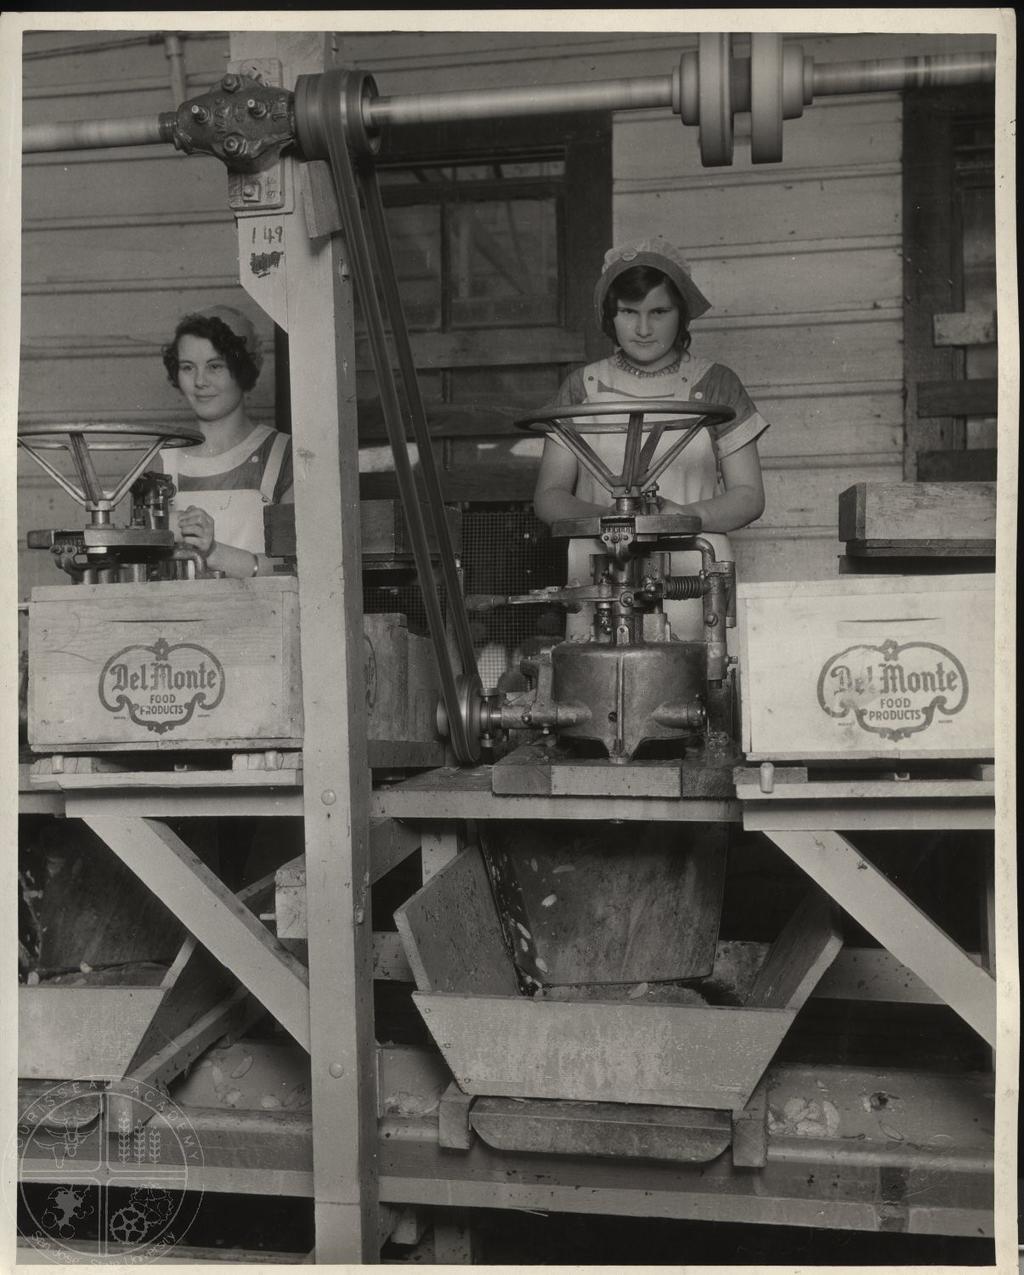 Men were assigned to do the higher paying, year-round work including supervision, heavy lifting, warehouse work, line deliveries, and tending and repairing the machines.